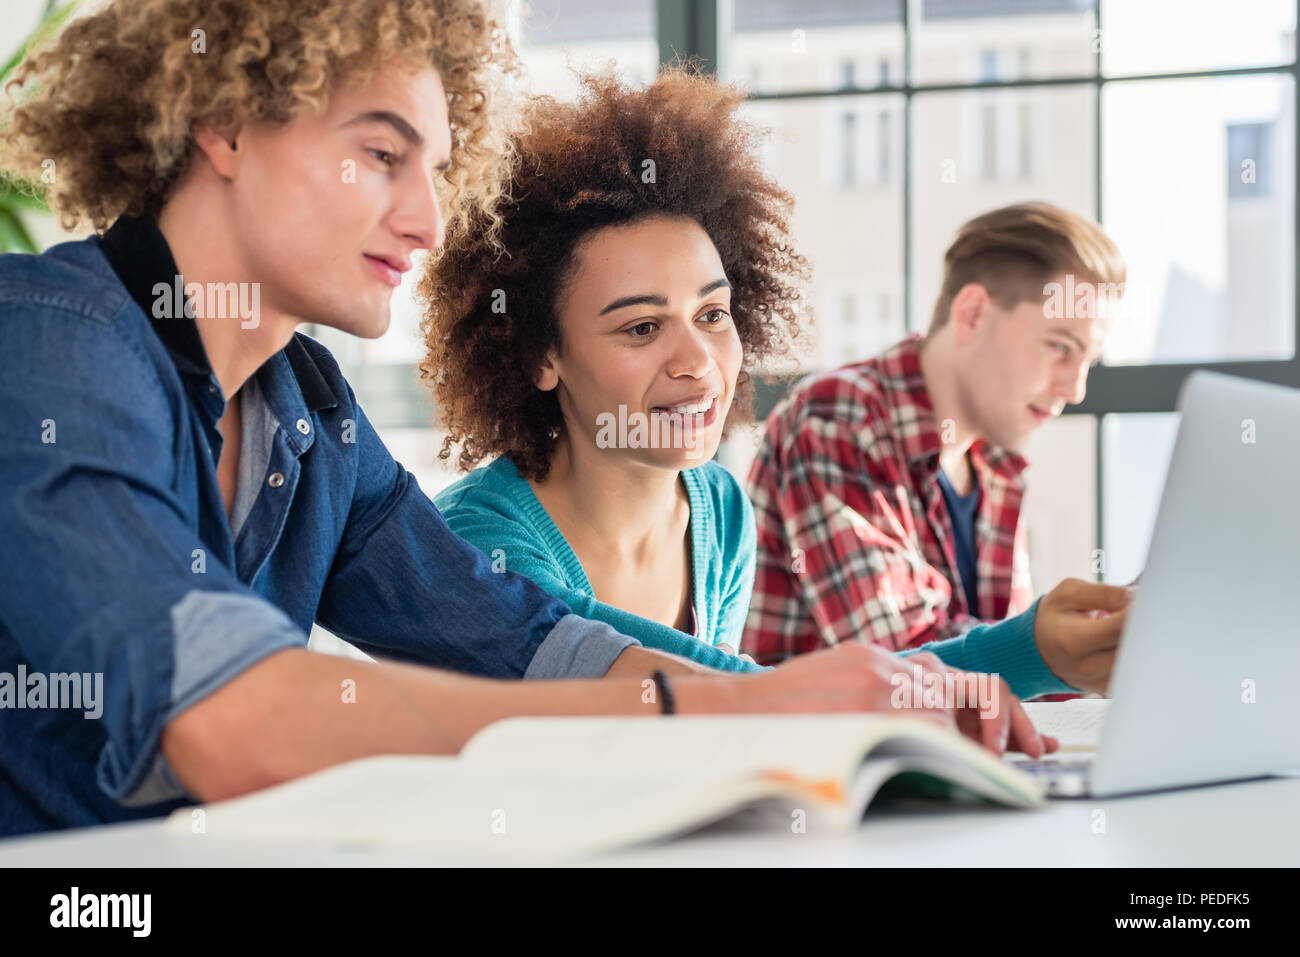 Cheerful woman writing an assignment while sitting between two classmates Stock Photo